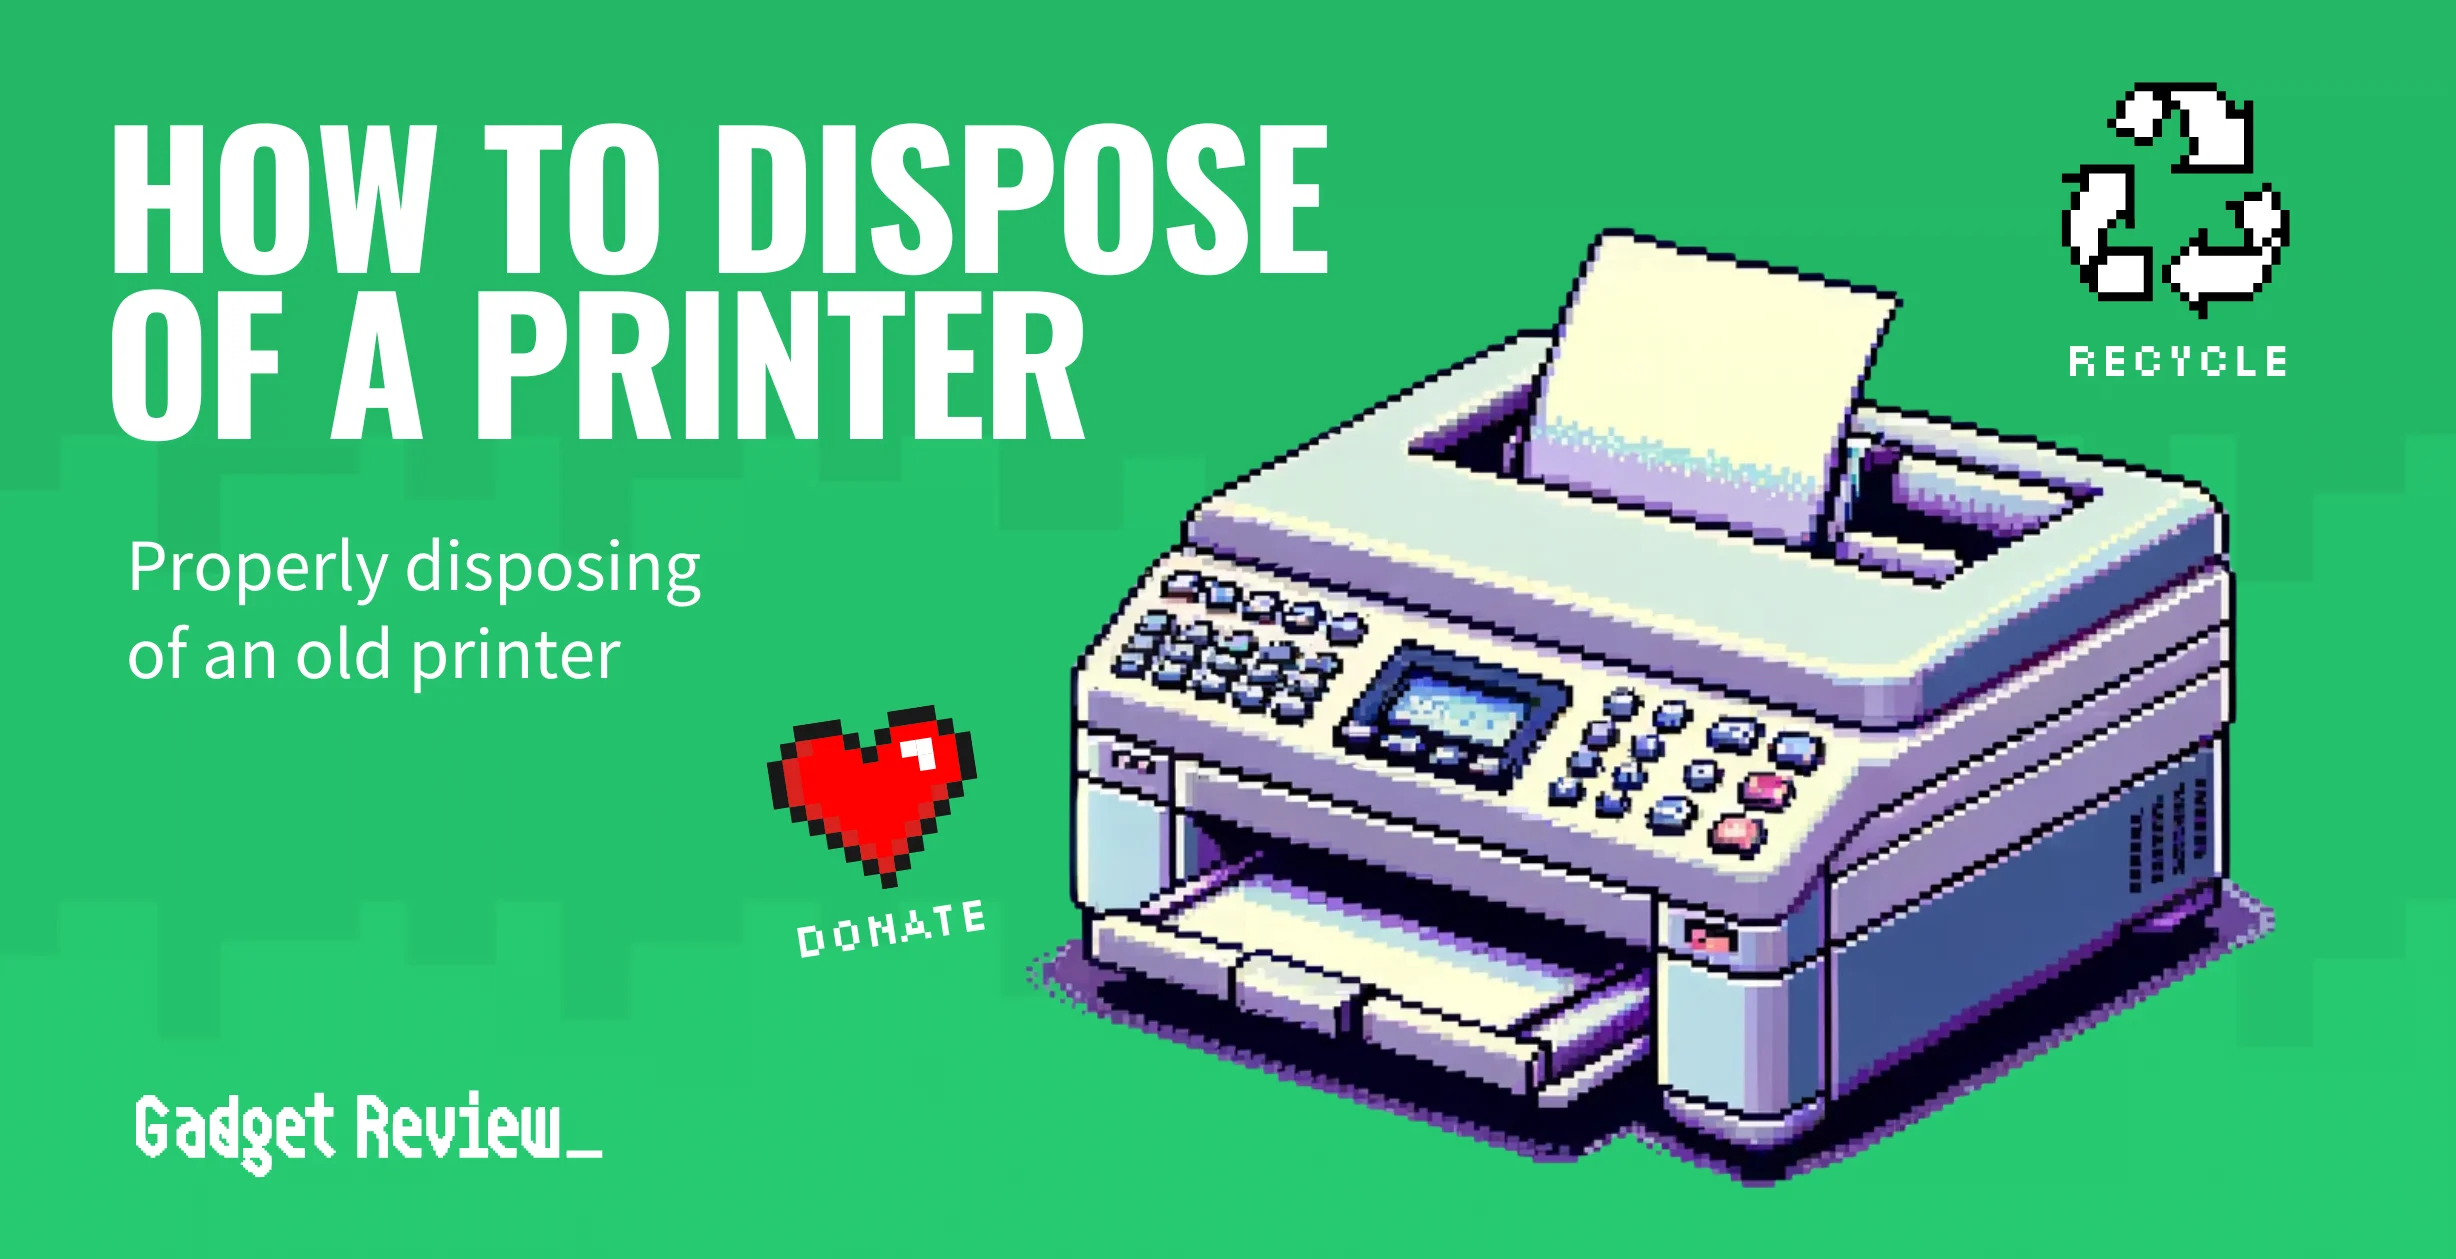 How to Dispose of a Printer